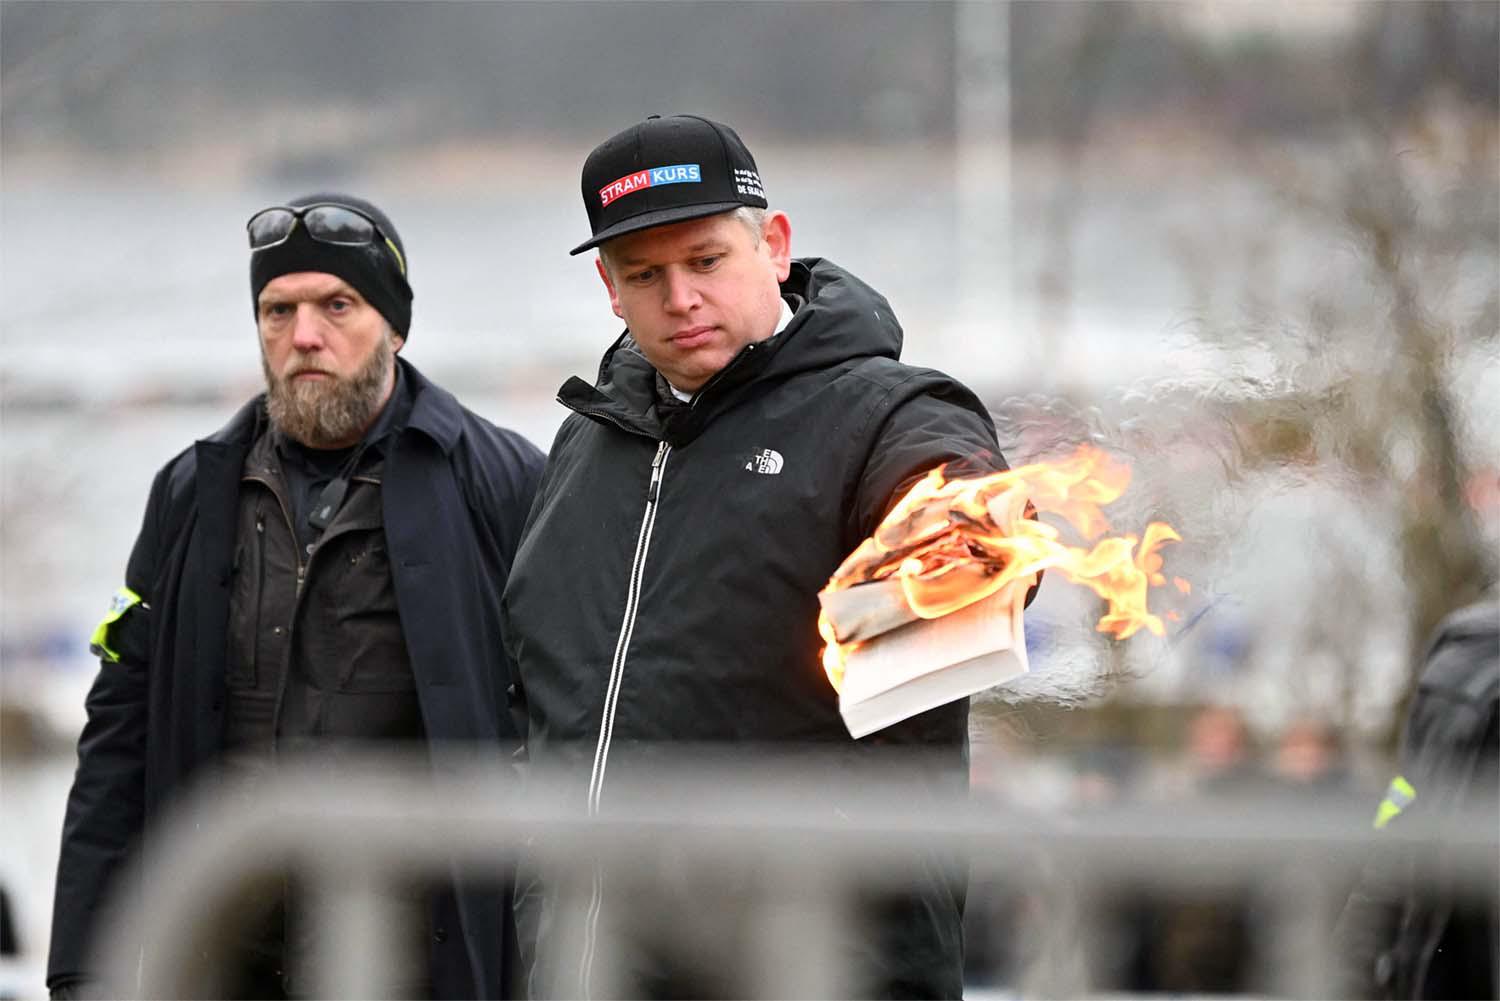 An anti-immigrant politician from the far-right fringe burned a copy of the Koran near the Turkish Embassy in Stockholm